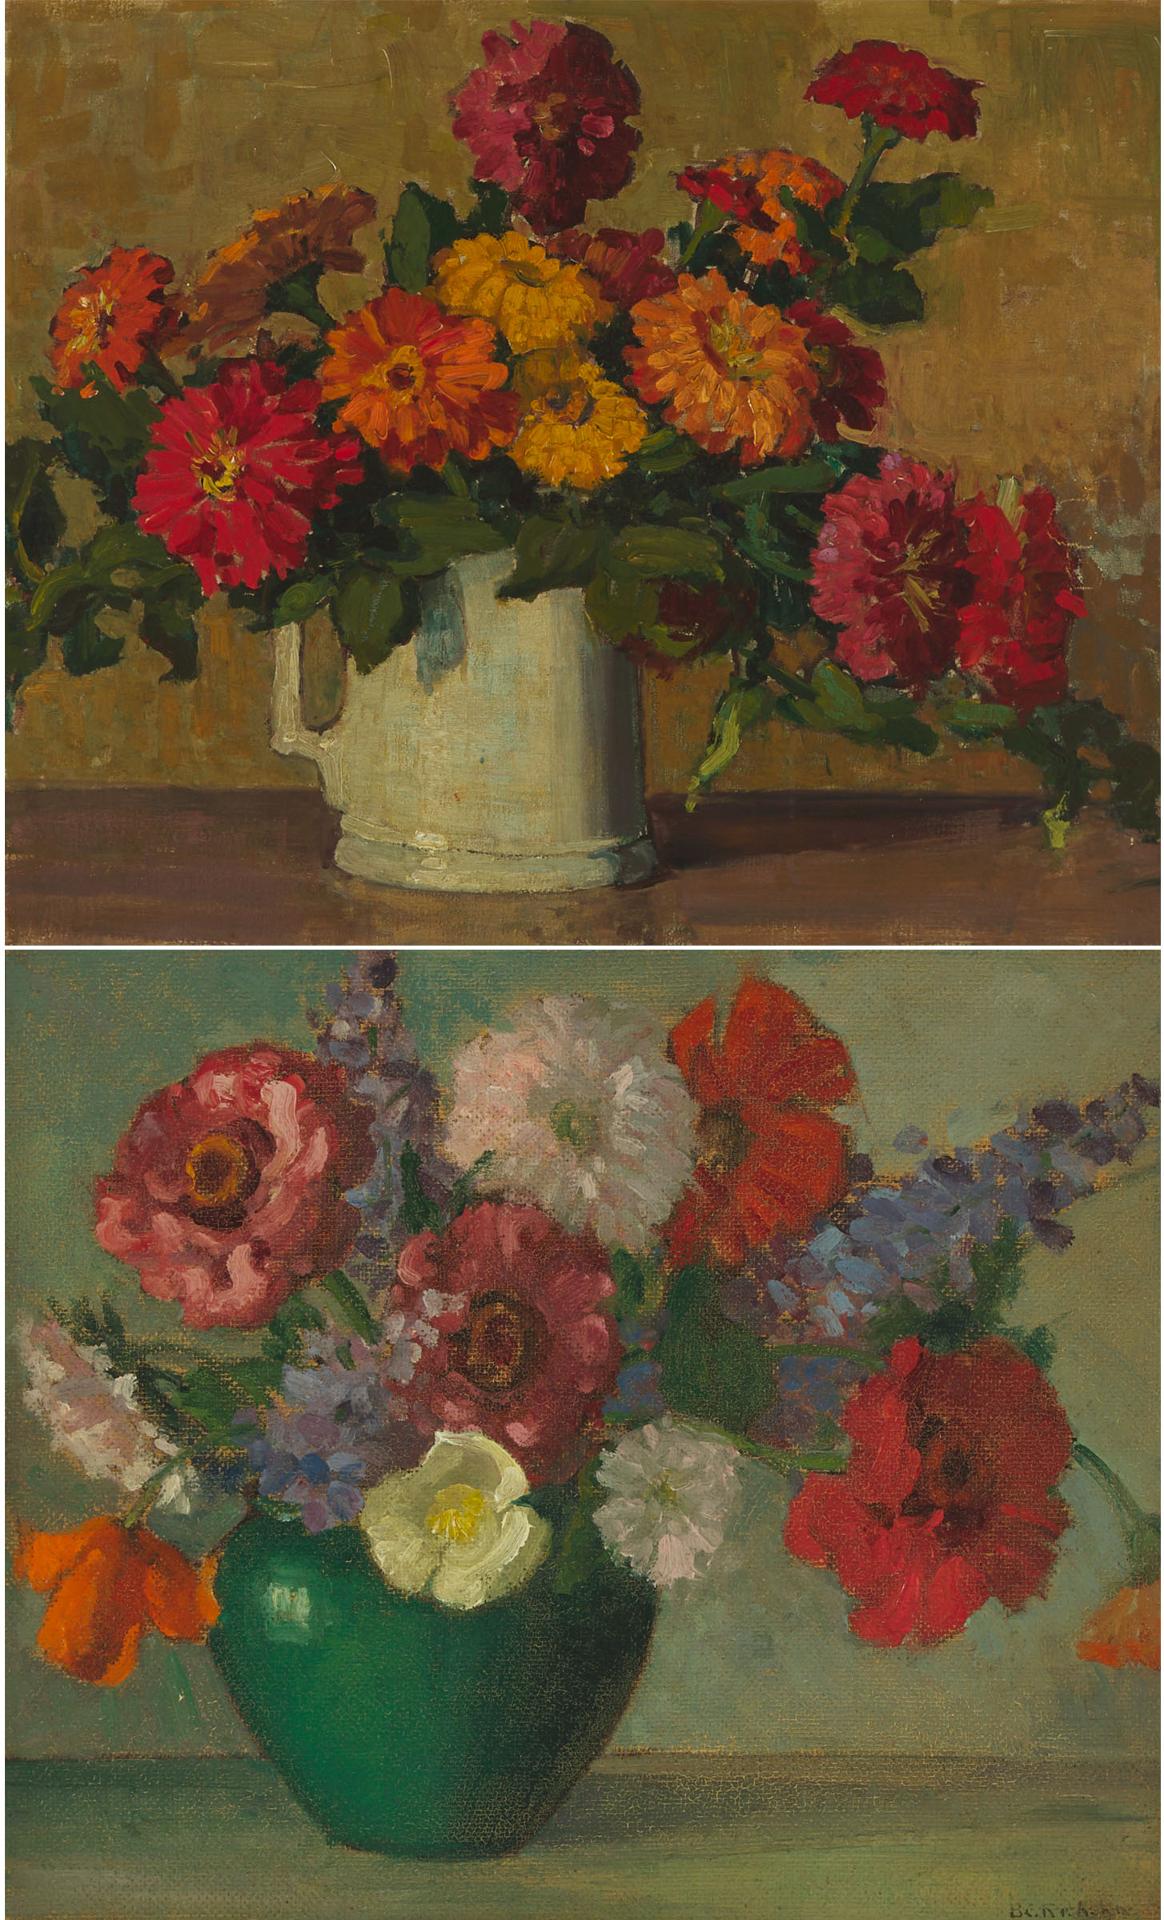 Belle C. Richstone (1930) - Zinnias In A White Pitcher; Mixed Flowers In A Green Vase